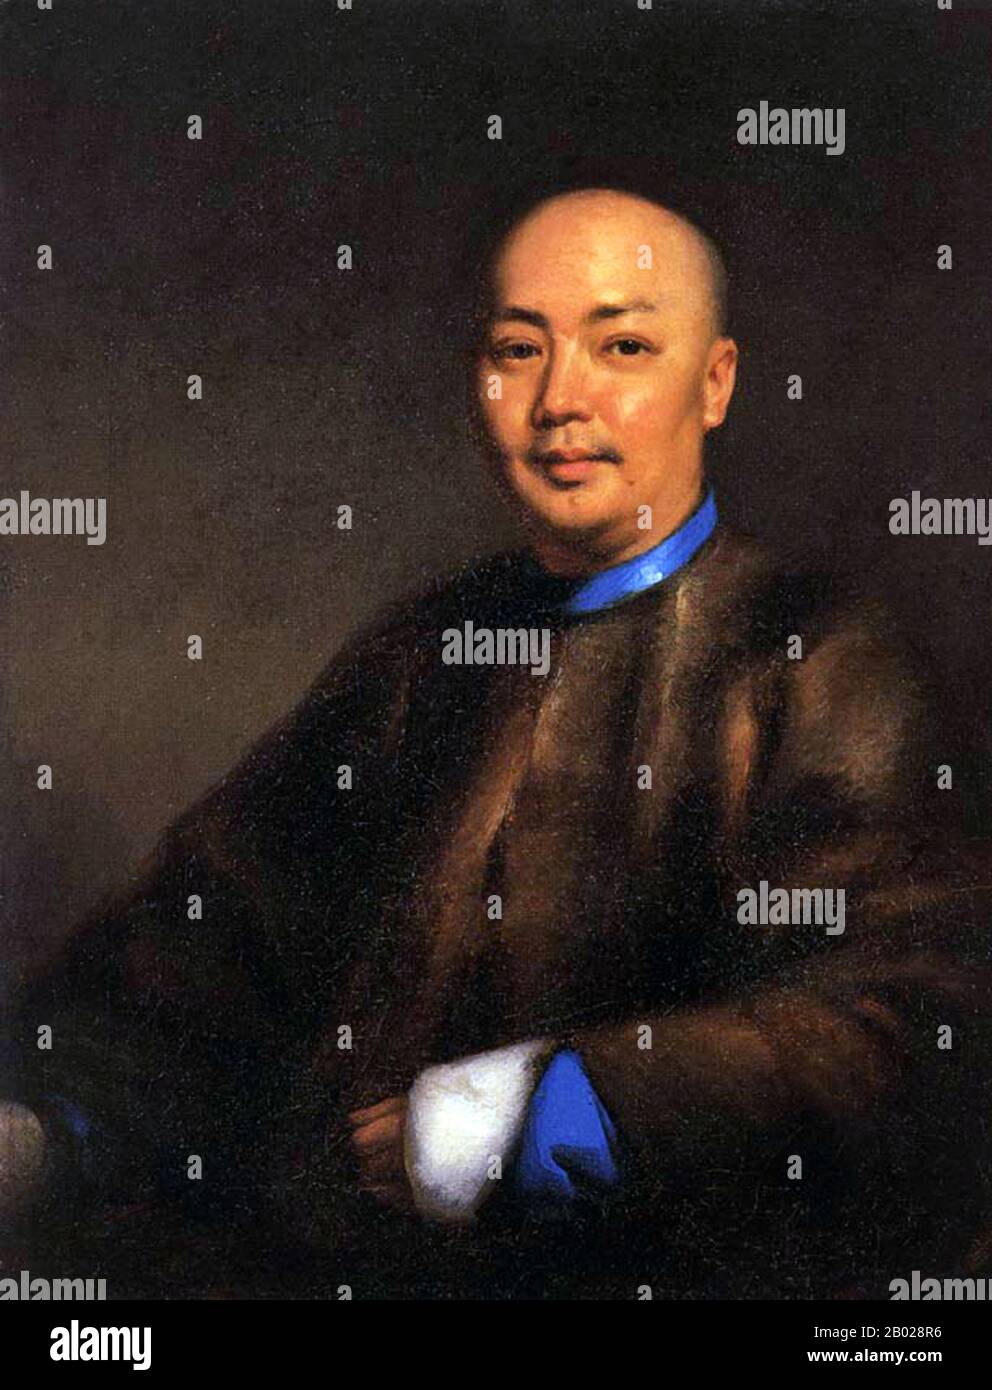 Lam Qua (Chinese: 林官; Cantonese Yale: Lam Kwan; 1801–1860), or Kwan Kiu Cheong (關喬昌), was a Chinese painter from the Canton province in Qing Dynasty China, who specialized in Western-style portraits intended largely for Western clients. Lam Qua was the first Chinese portrait painter to be exhibited in the West. He is known for his medical portraiture, and for his portraits of Western and Chinese merchants in Canton (Guangzhou) and Macau. He had a workshop in 'New China Street' among the Thirteen Factories in Canton.  In the 1820s, Lam Qua is said by some contemporaries to have studied with Geo Stock Photo